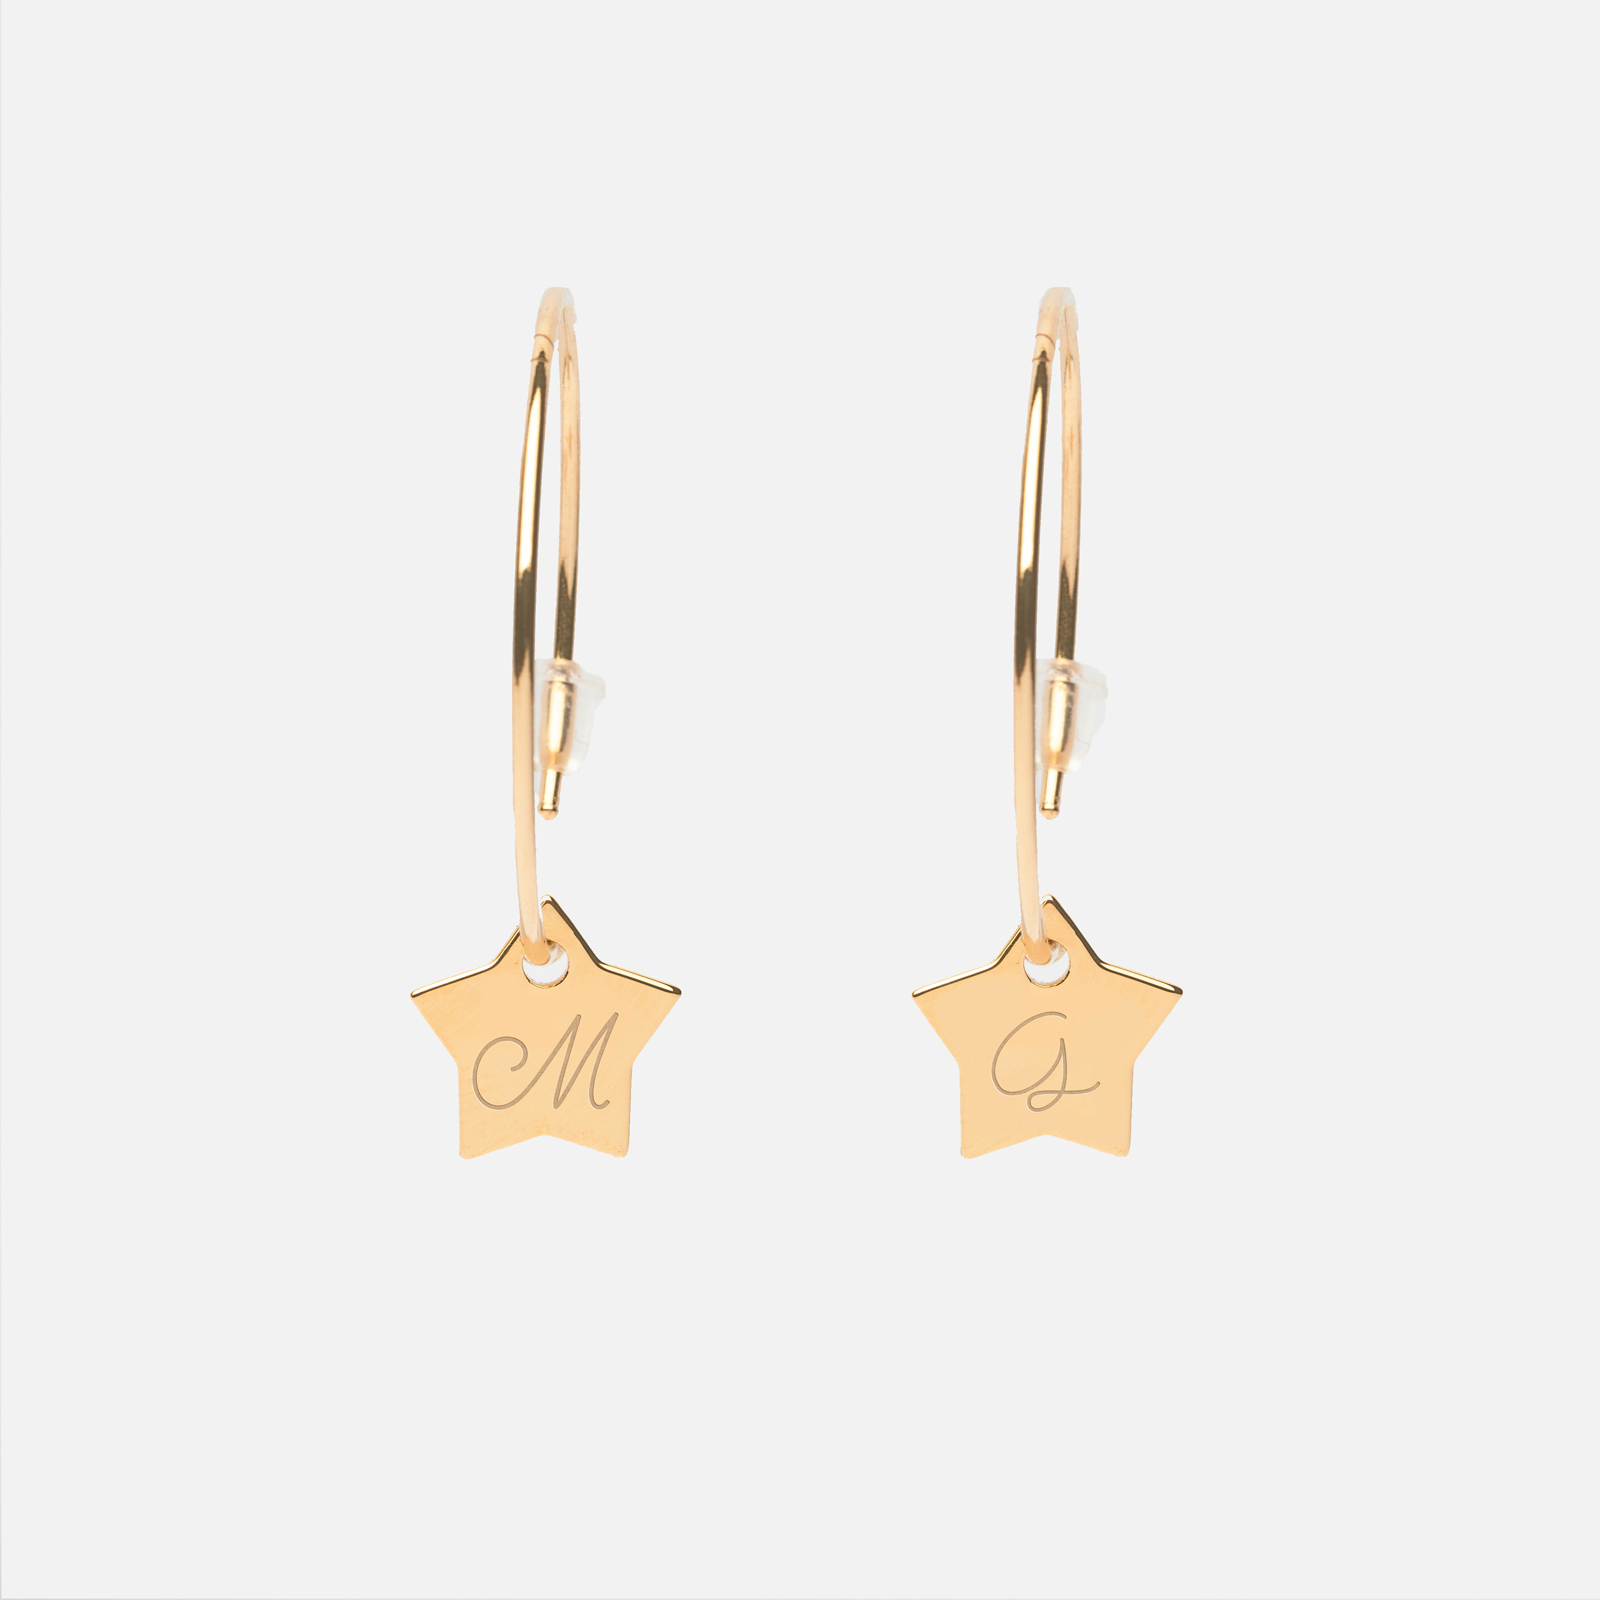 Creole earrings personalised gold-plated medals engraved initial star 12 mm